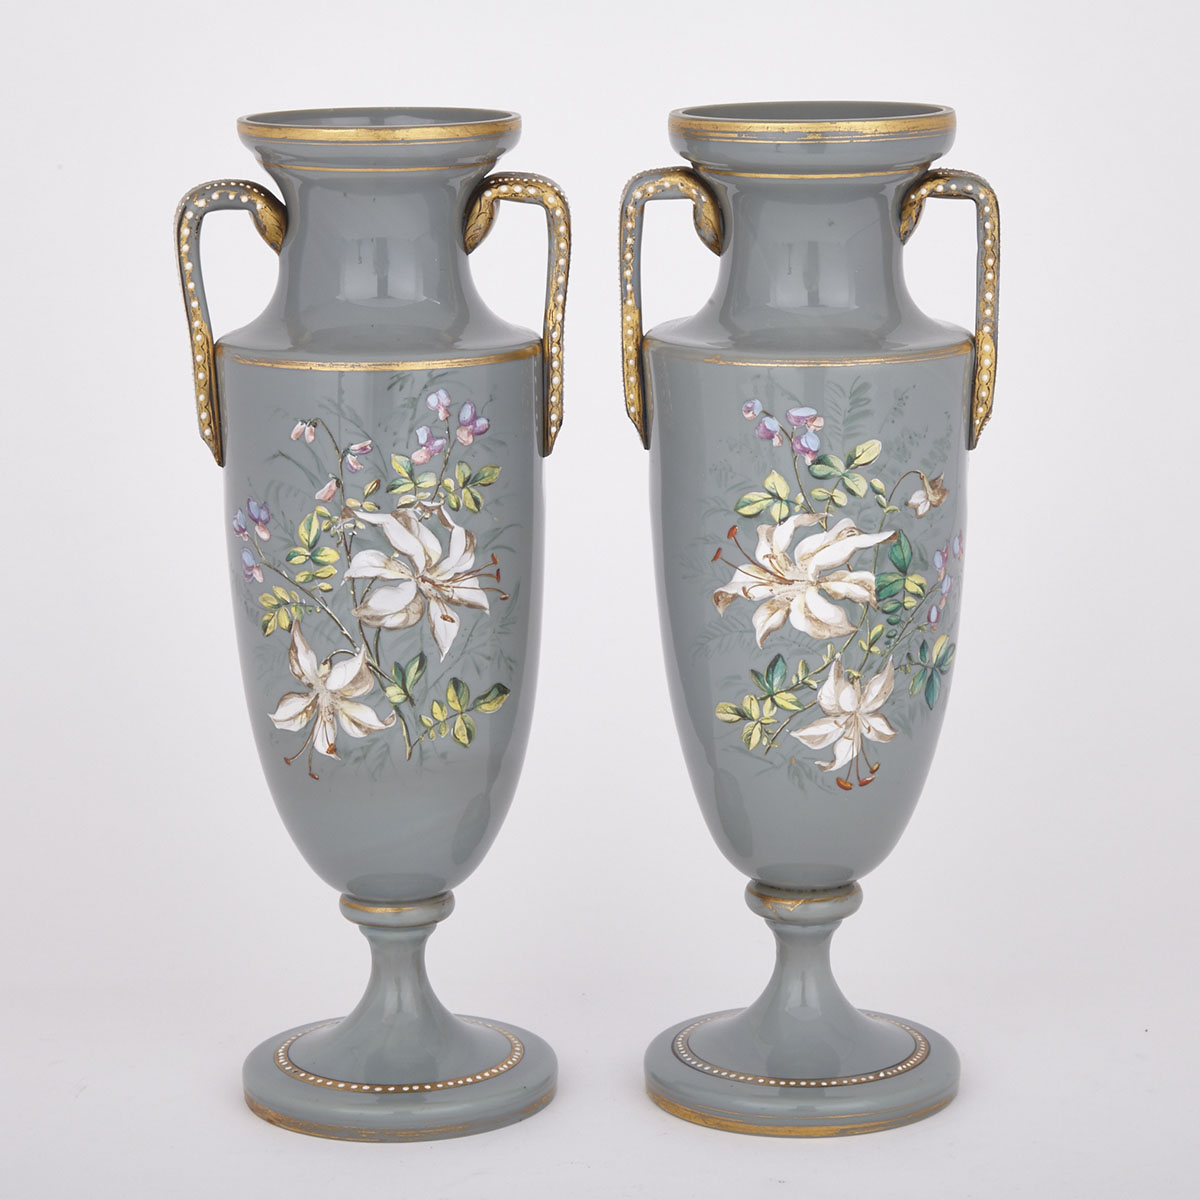 Pair of Continental Enameled and Gilt Grey Opaline Glass Two-Handled Vases, late 19th century